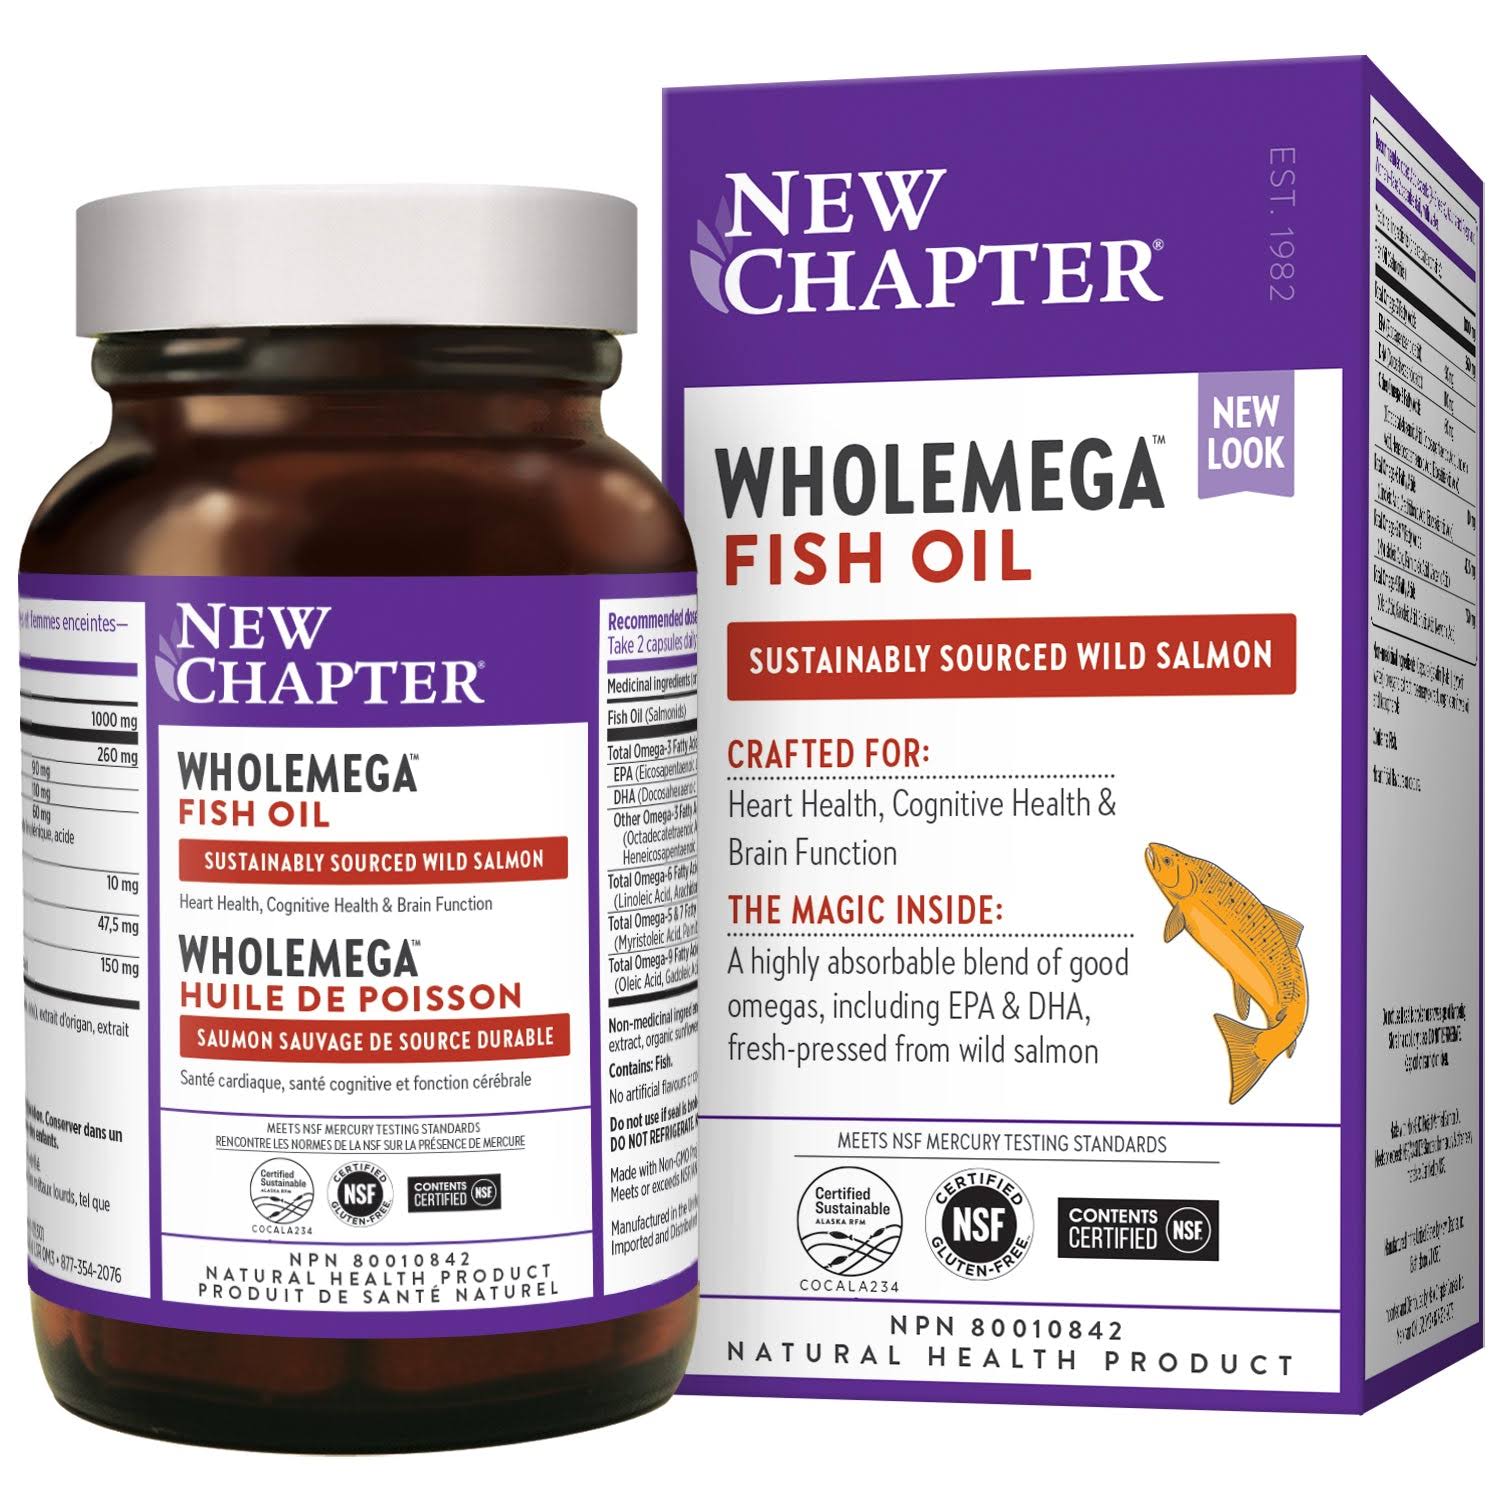 New Chapter Wholemega Whole Fish Oil - 120 softgels